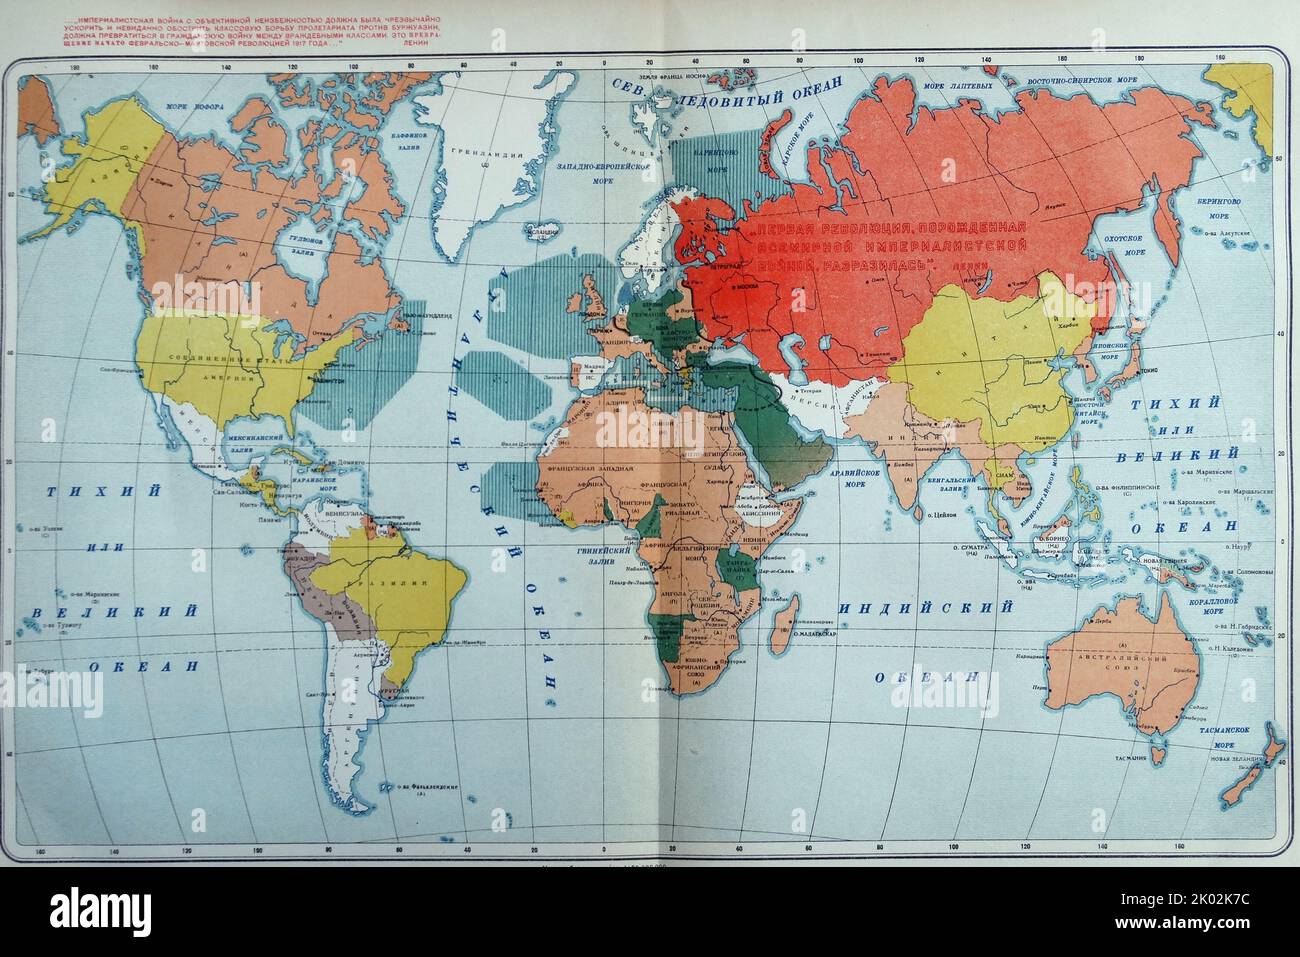 Empires at War 1914-1918. Soviet Russian map showing imperial alliances around the globe during world war one. Stock Photo